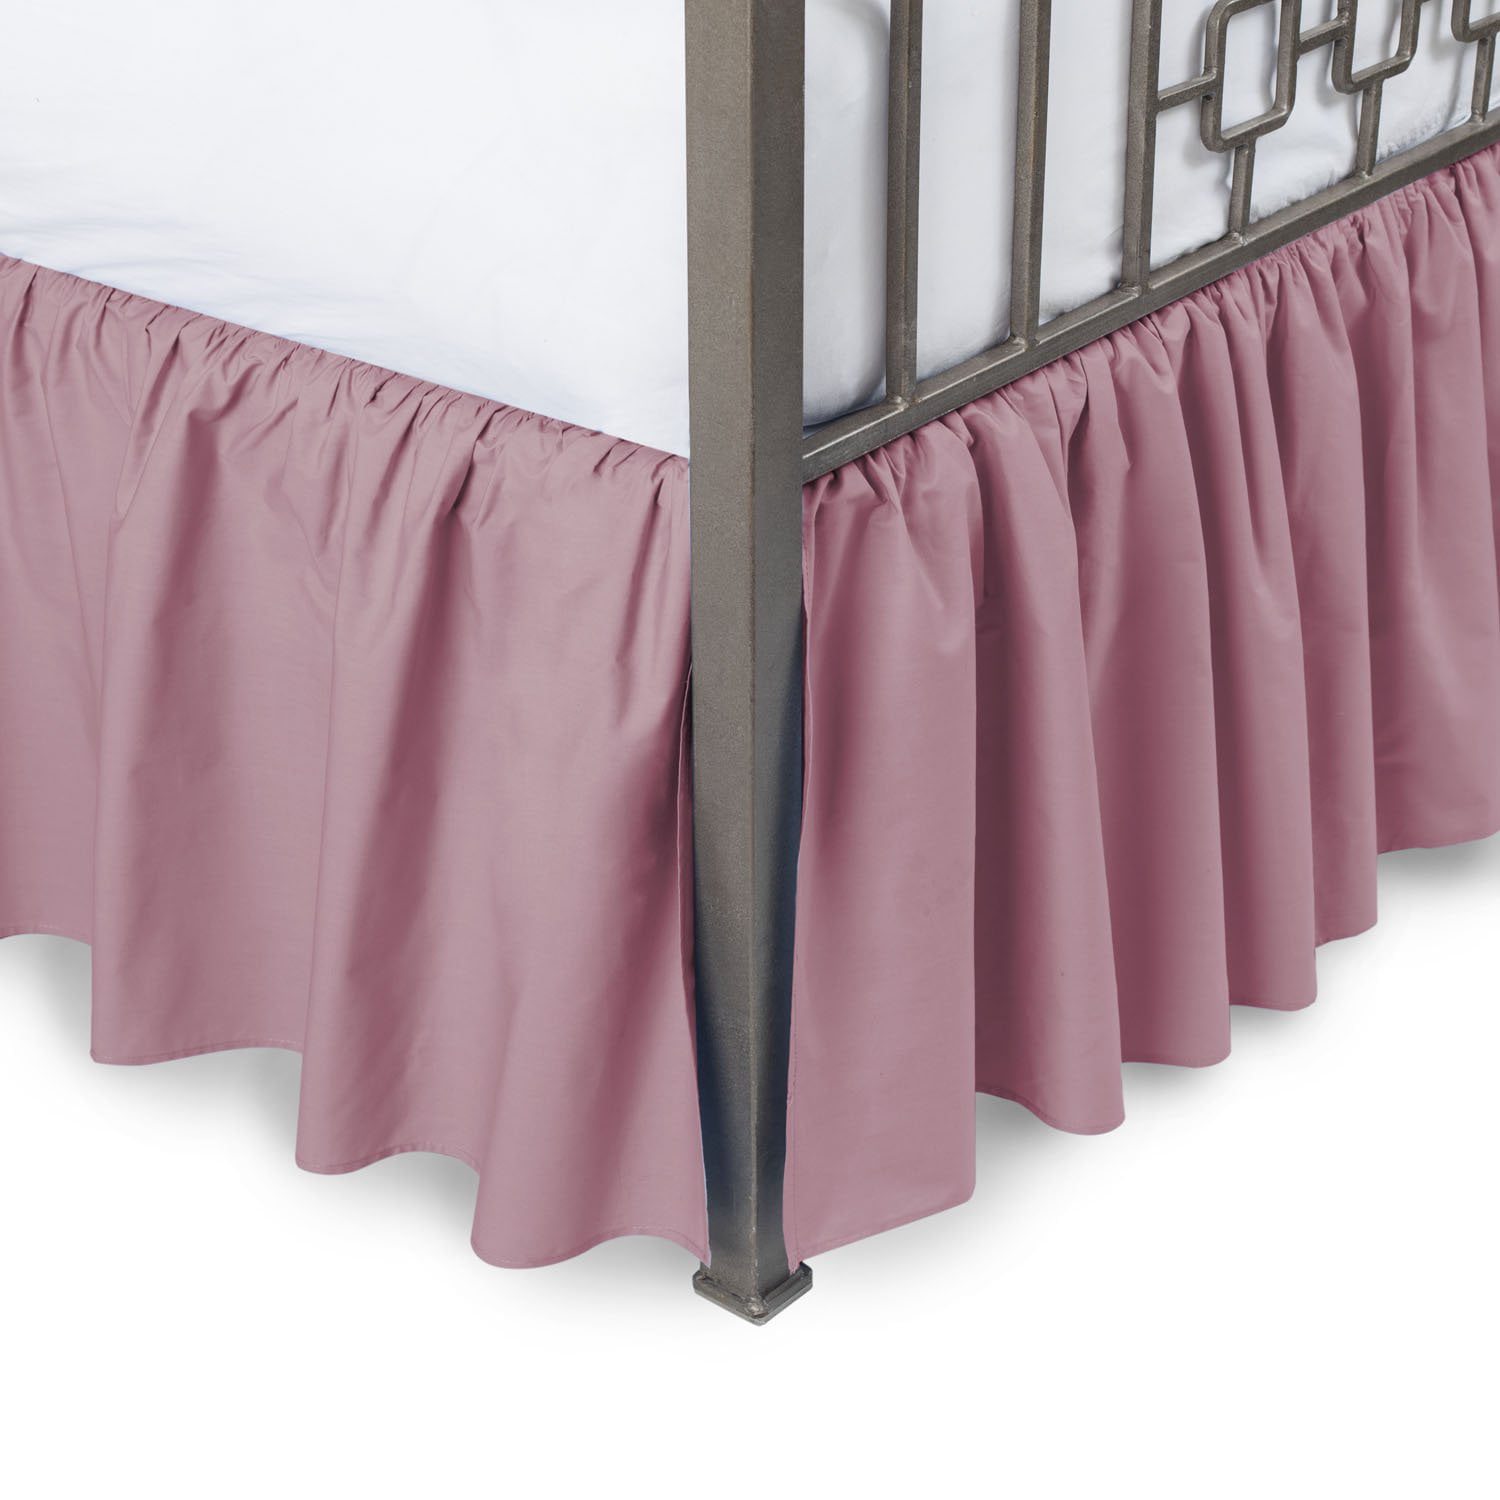 King Bed Skirts 18 Inch Drop - www.inf-inet.com